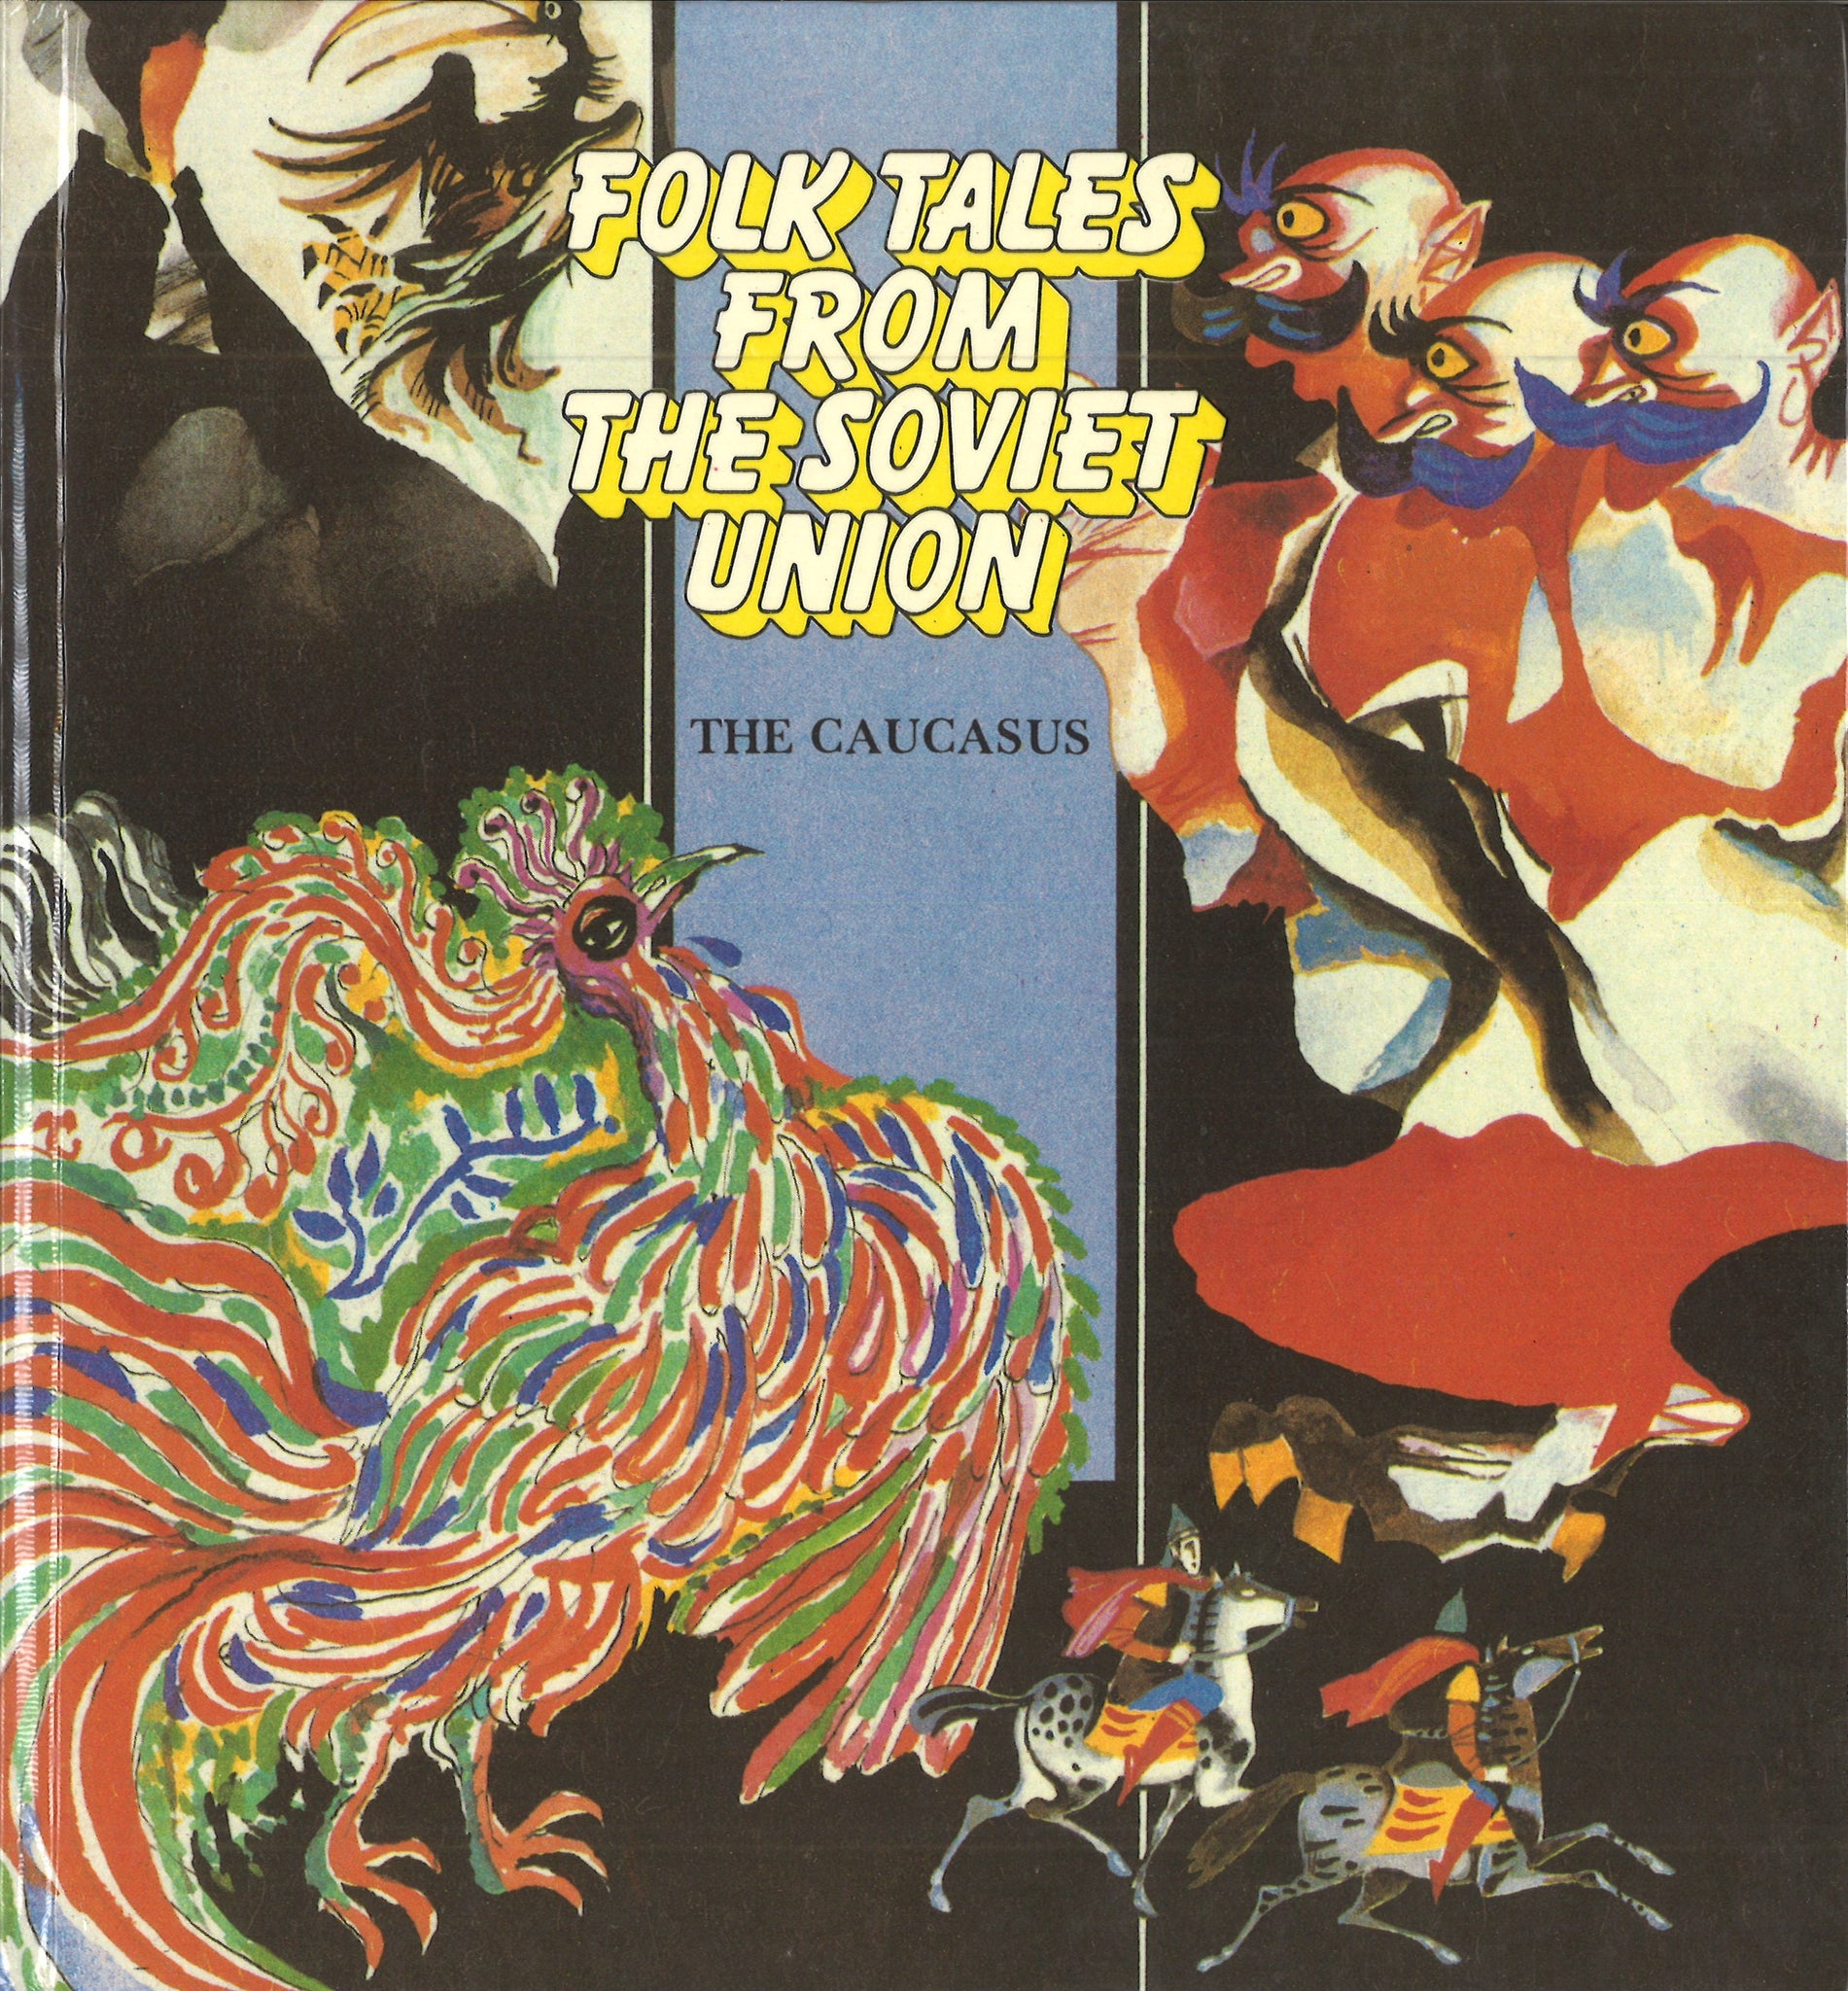 FOLK TALES FROM THE SOVIET UNION: The Caucasus